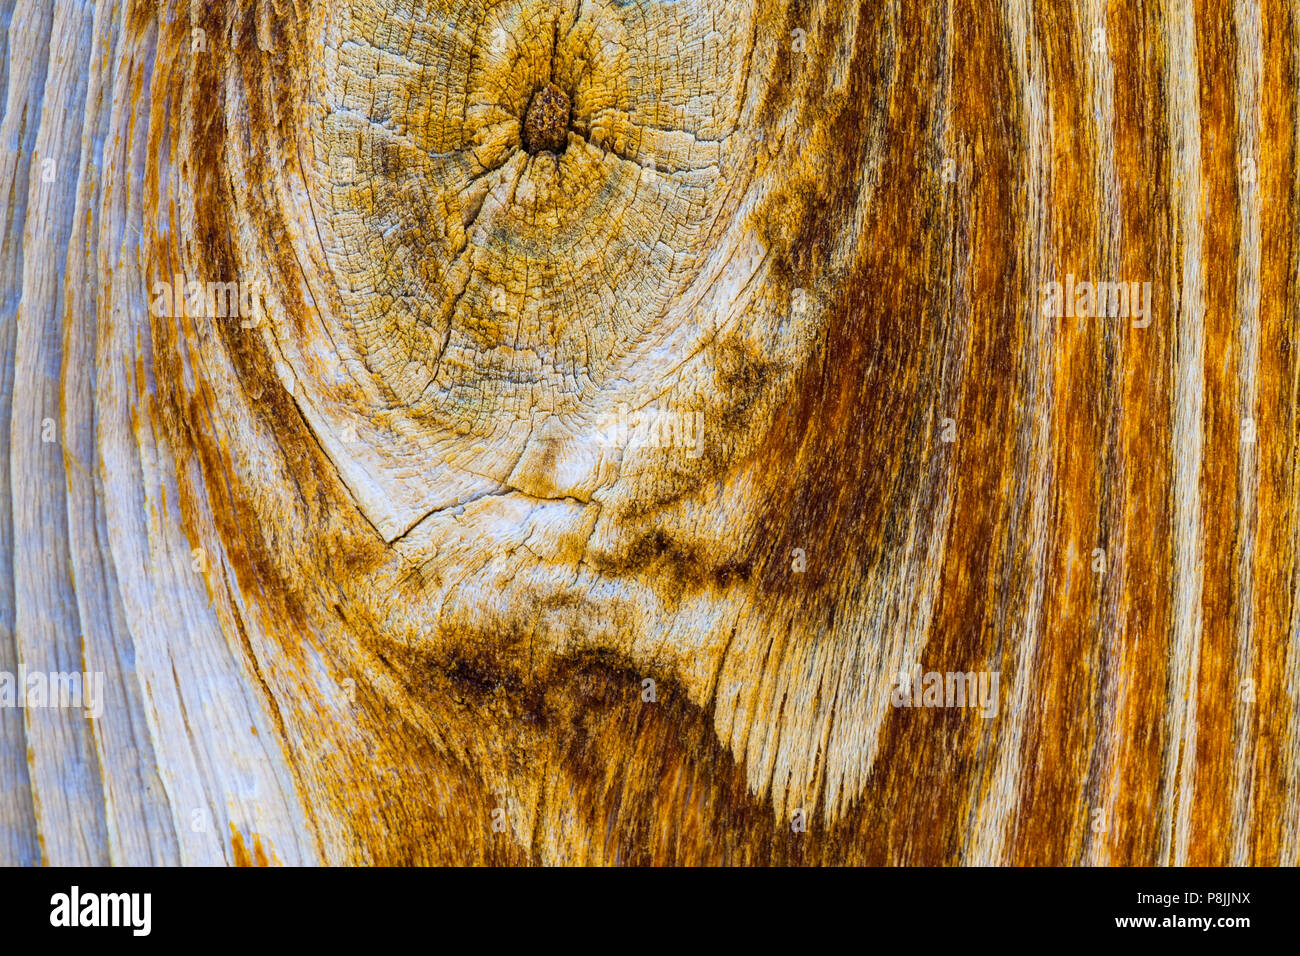 Texture of old and weathered wood Stock Photo